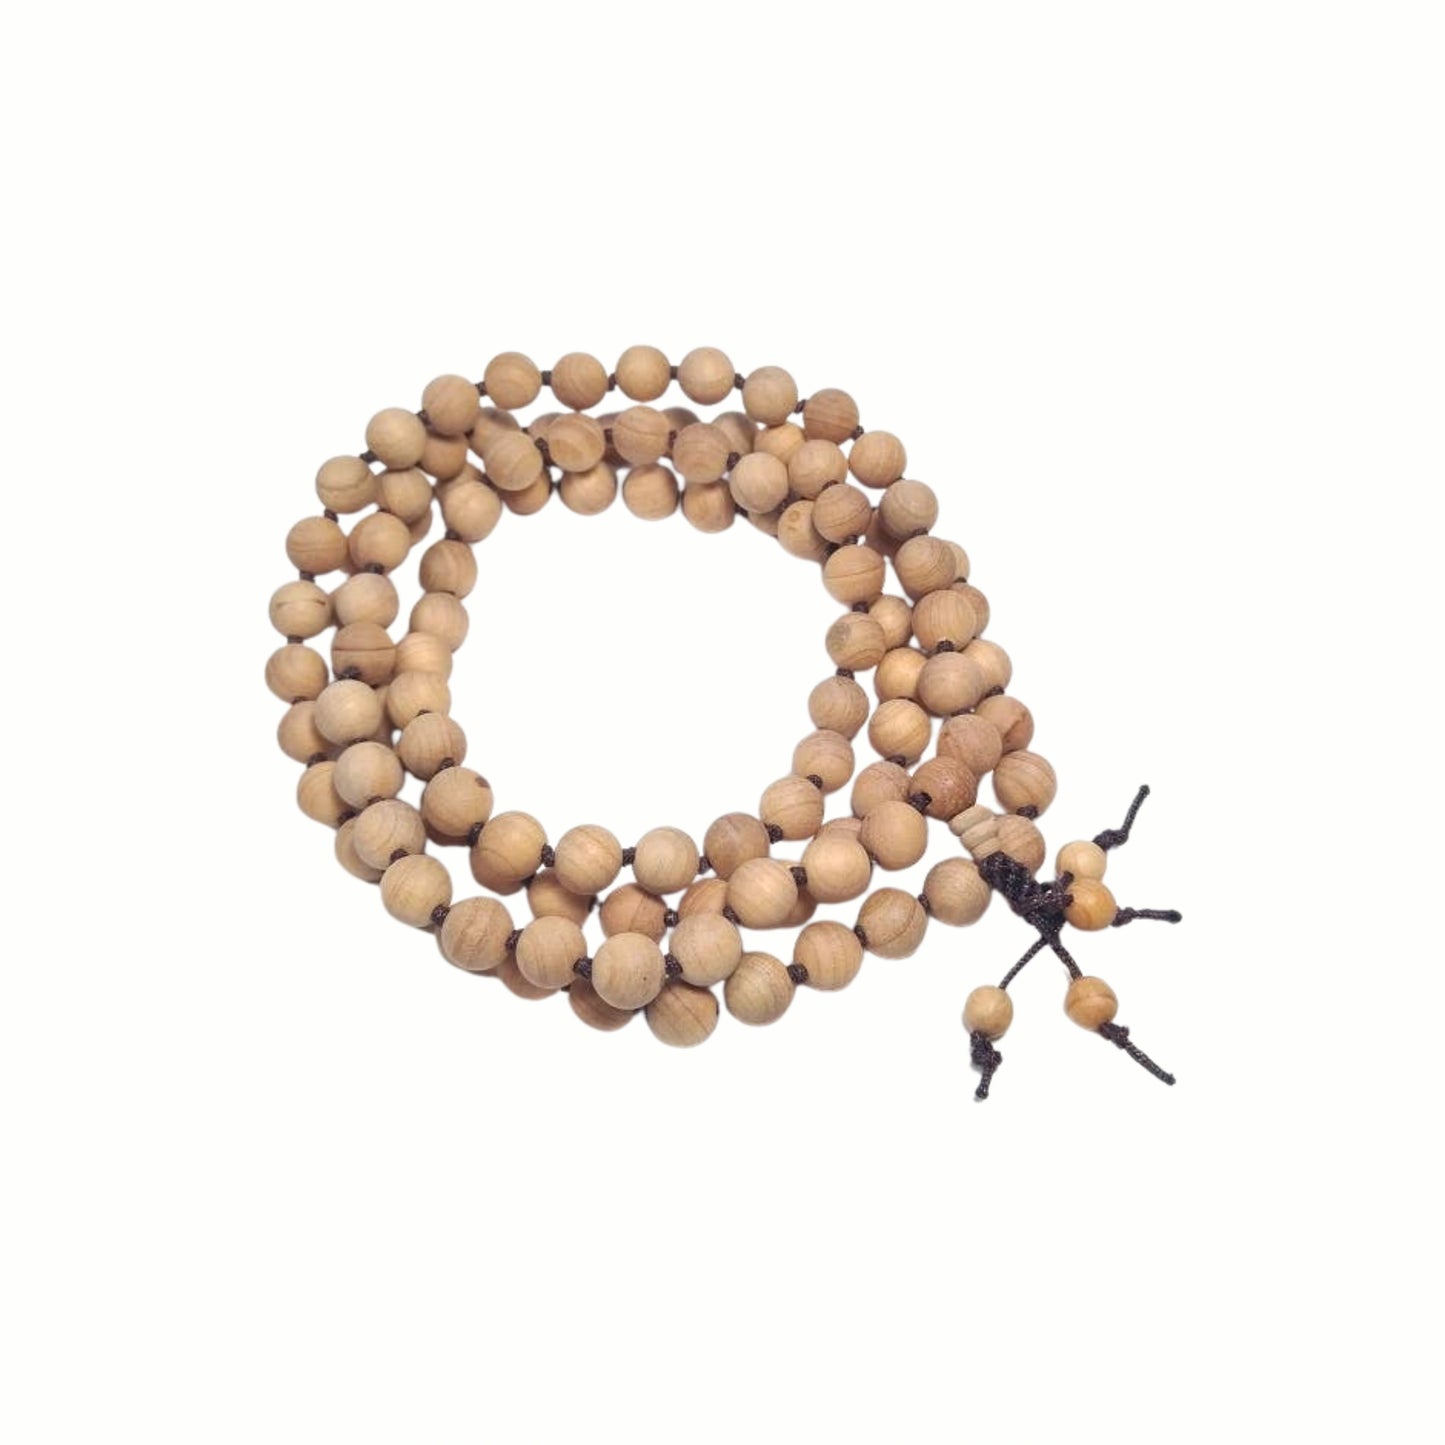 Cypress Wood Knotted 108 Mala - Prayer Beads - 8mm (1 Pack) (1 Pack)